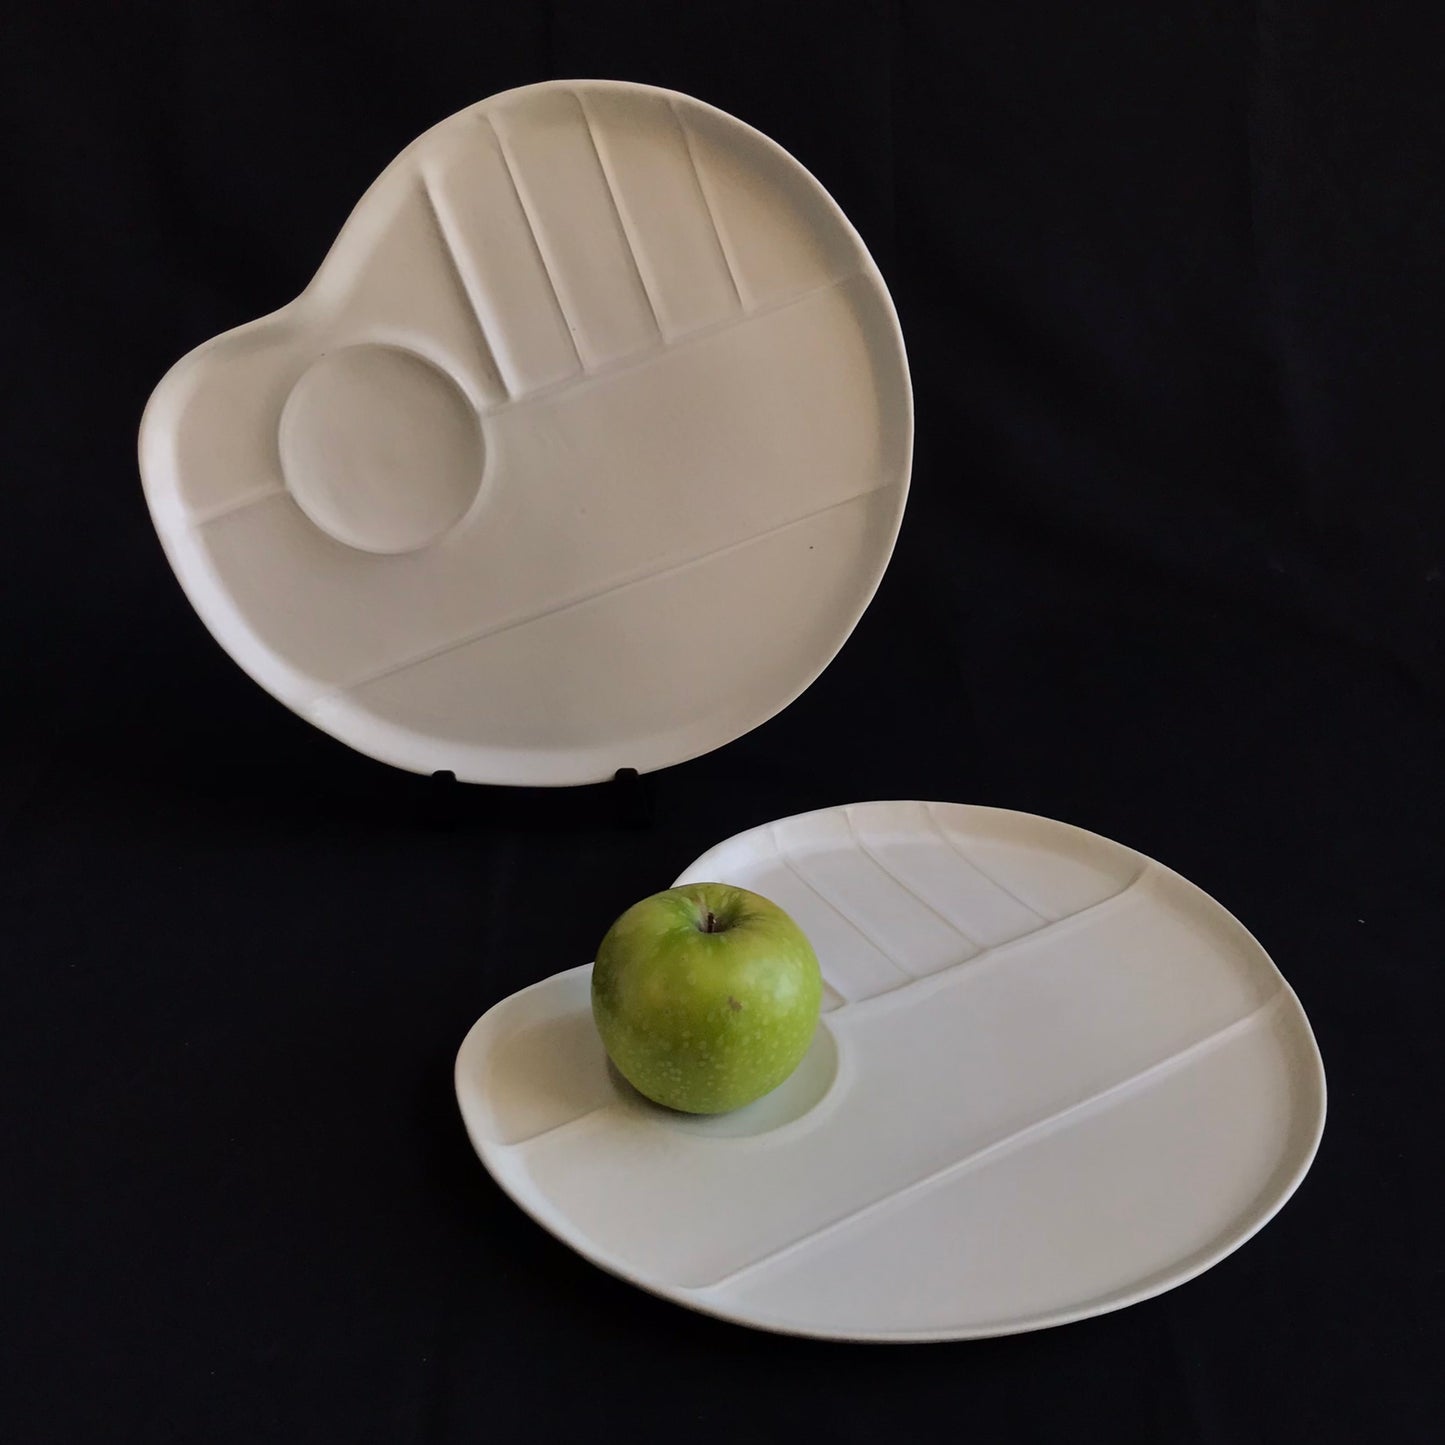 Palette-shaped plate